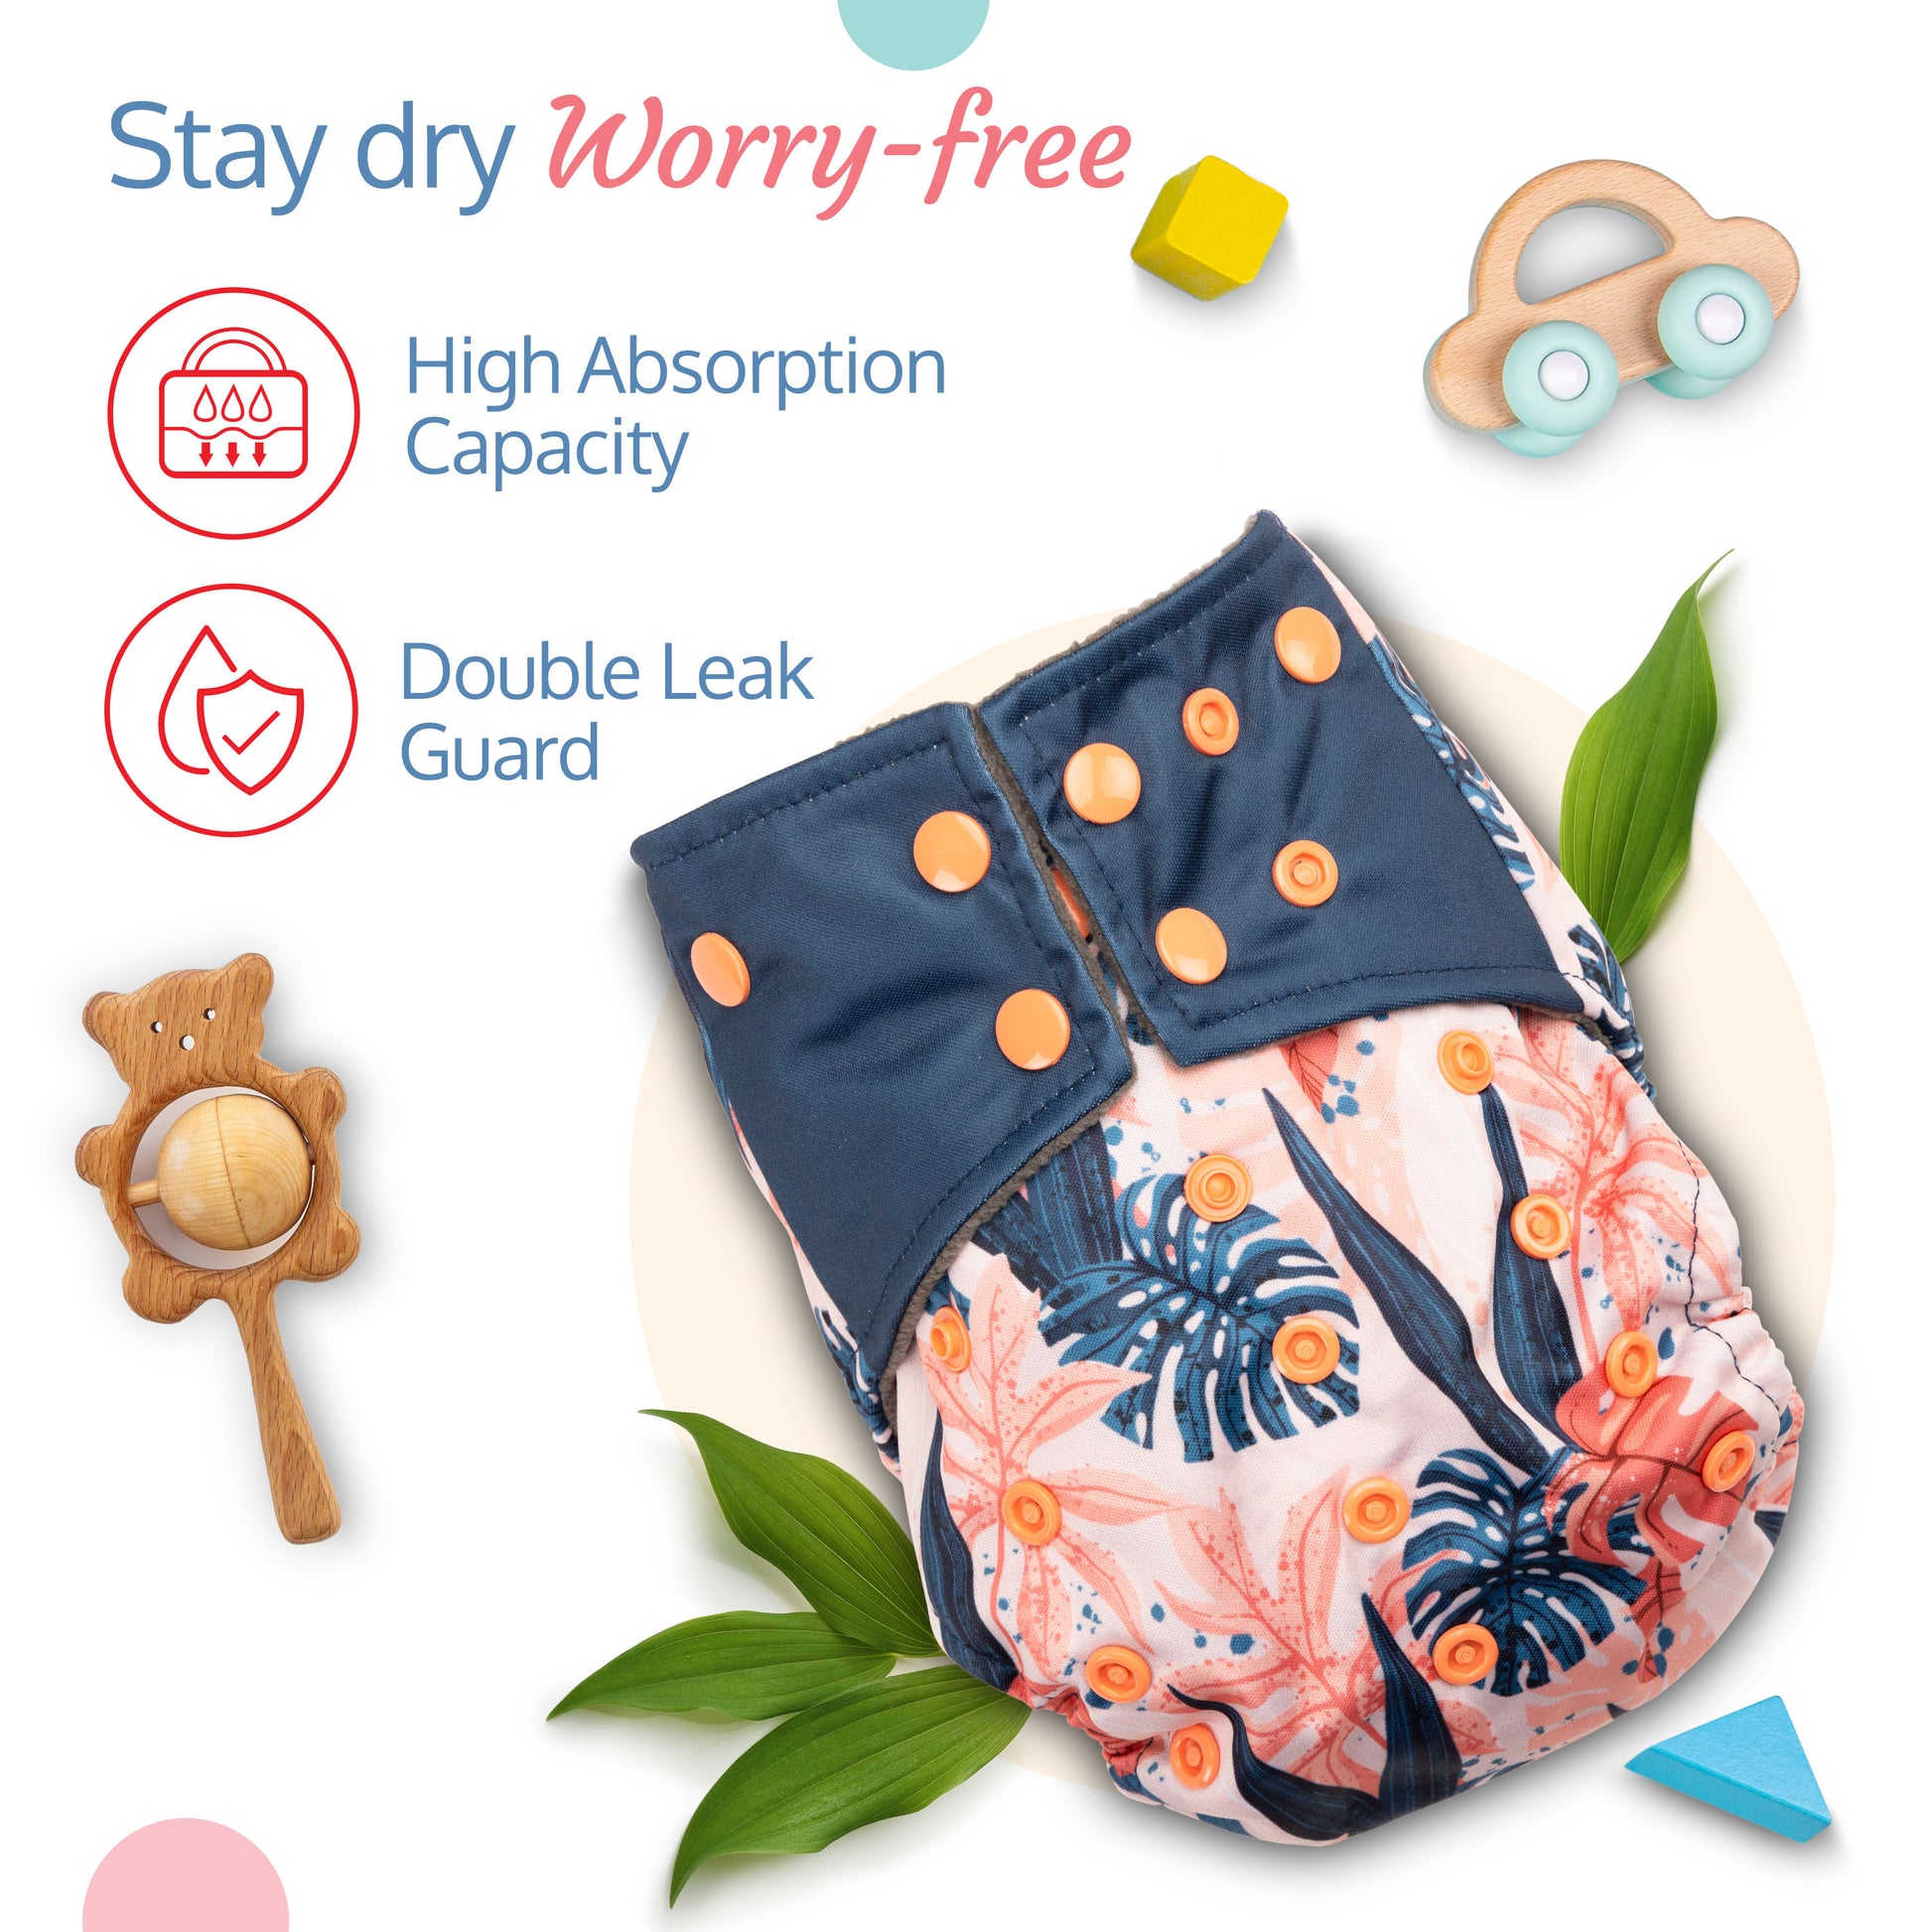 eHub Nepal - 👉Reusable Washable Cloth Diaper Underwear 👉Washable Reusable  Cloth Diaper 👉All in one size waist tab overlaps for extra small waist  size 👉Double Rows of snaps fit well 👉Strong absorbent